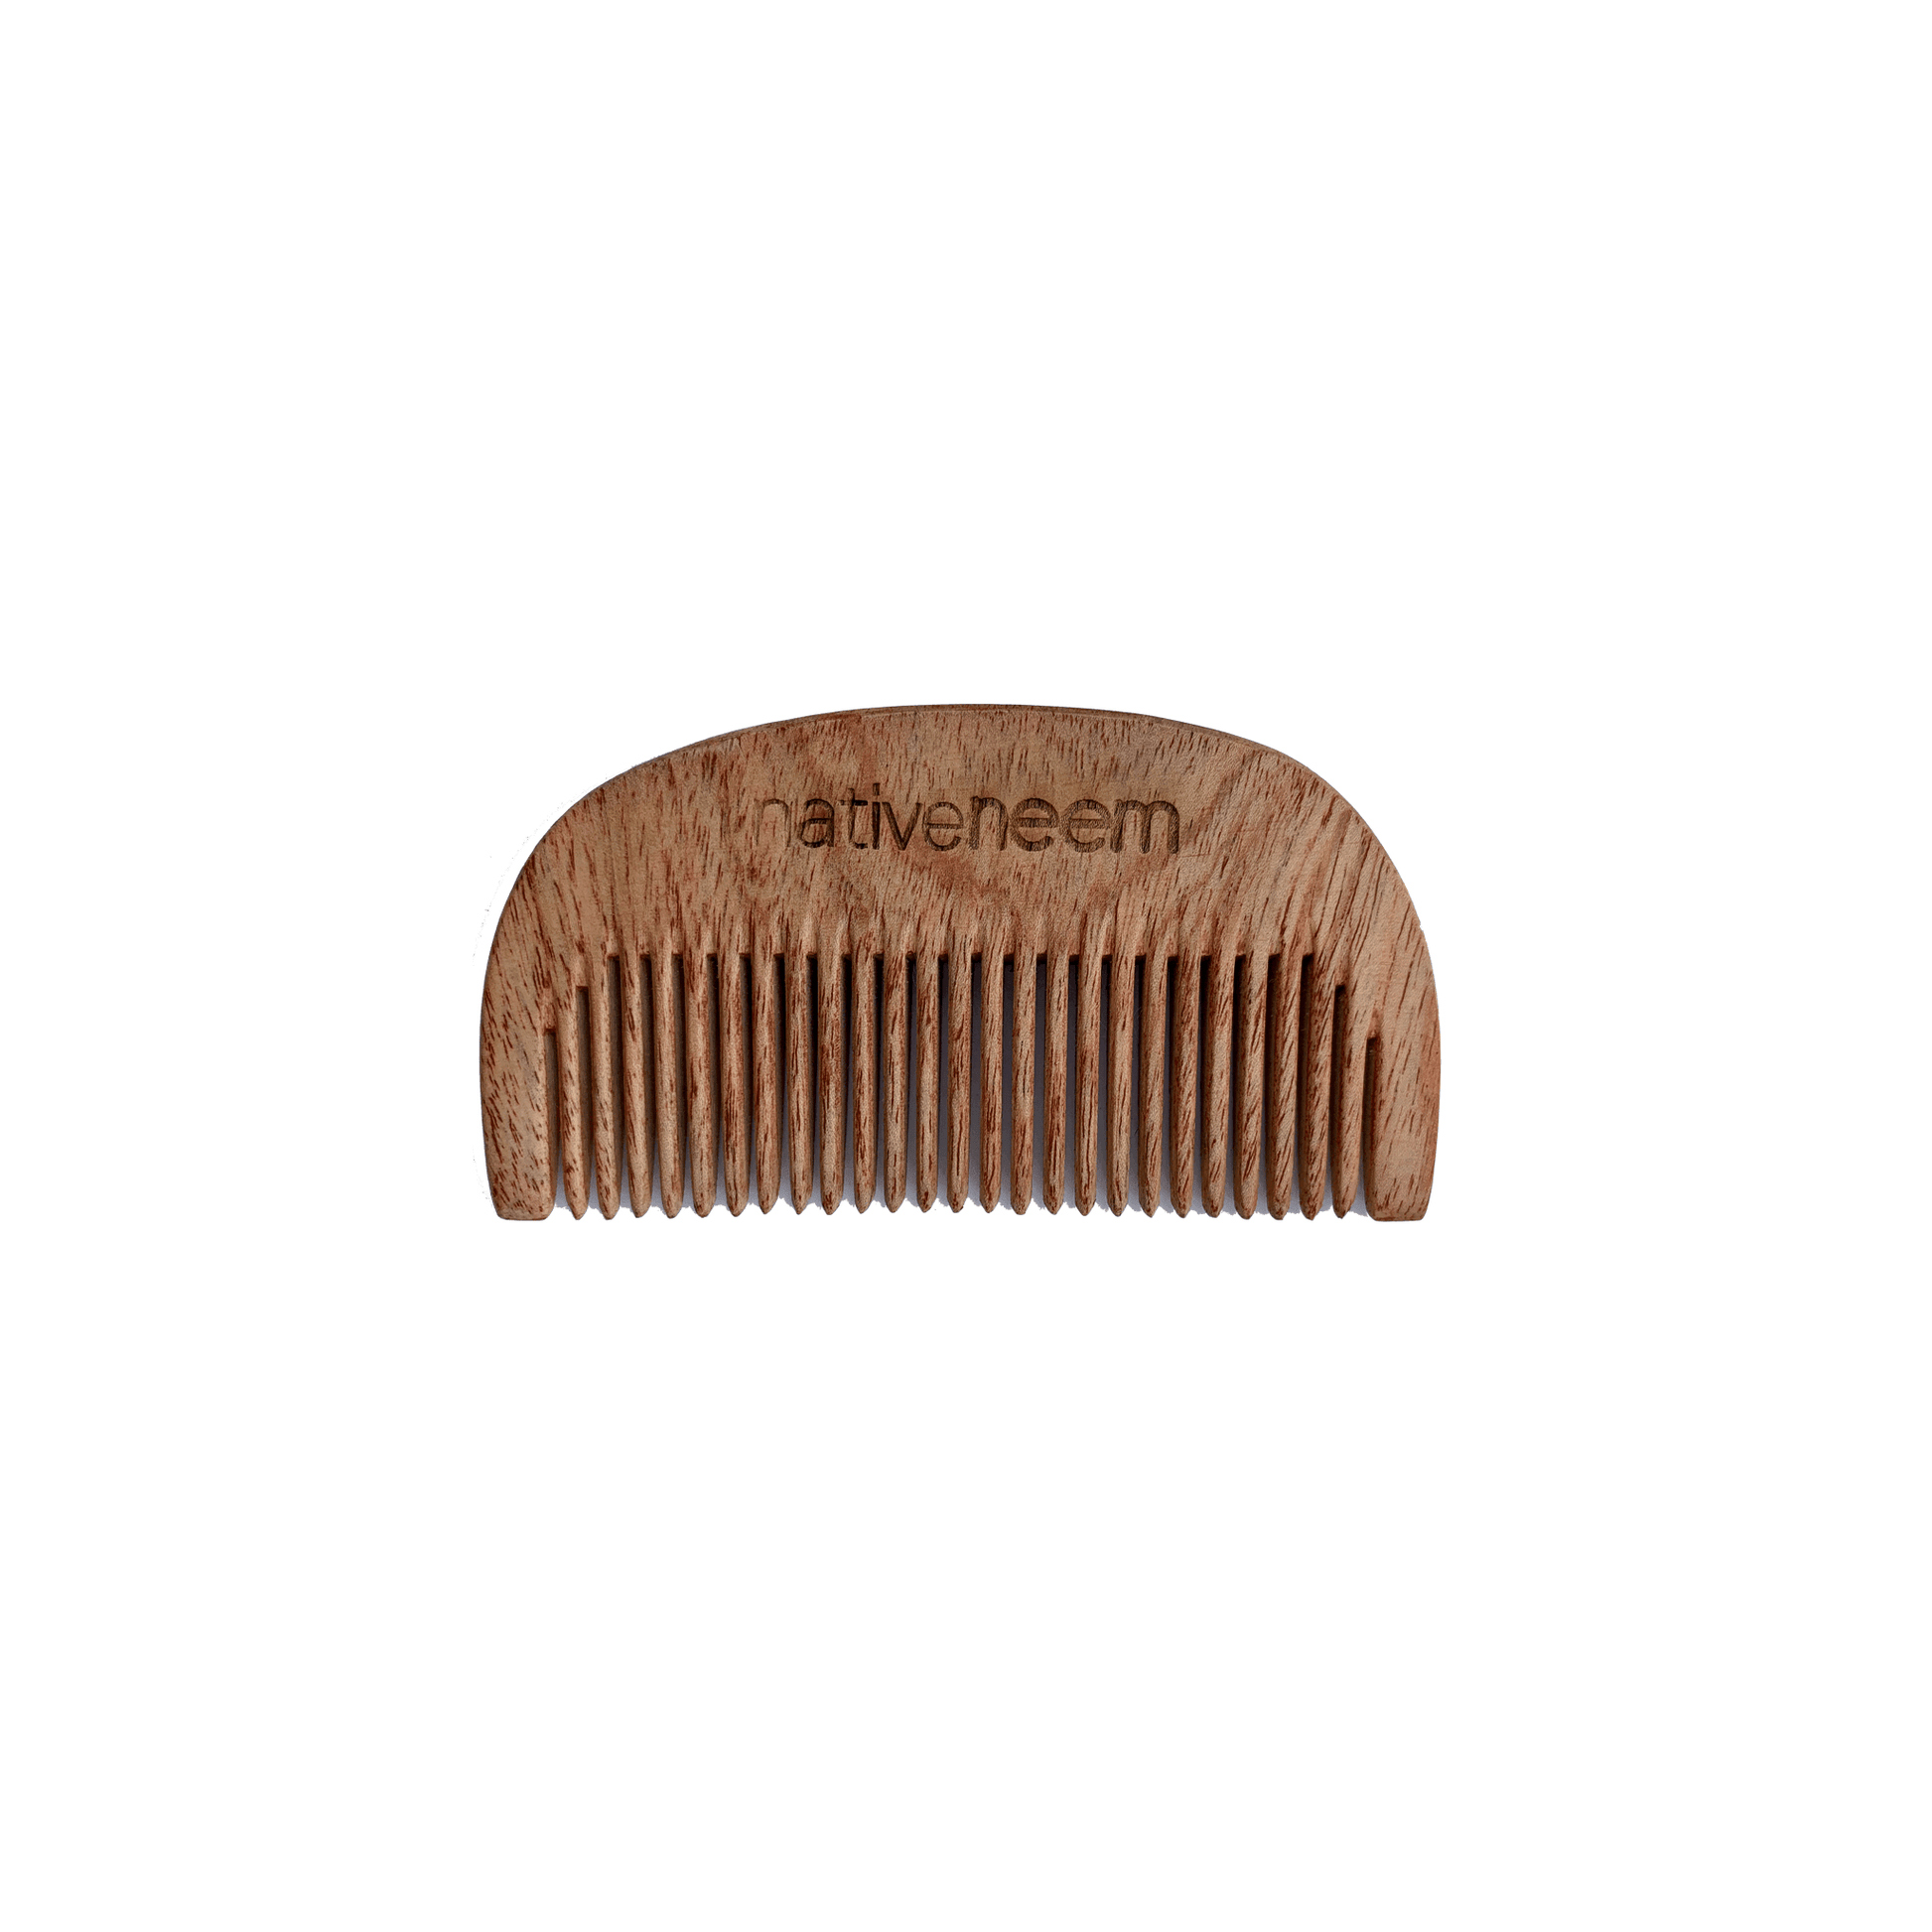 Wooden Neem Comb Mixed Tooth - Green Trading